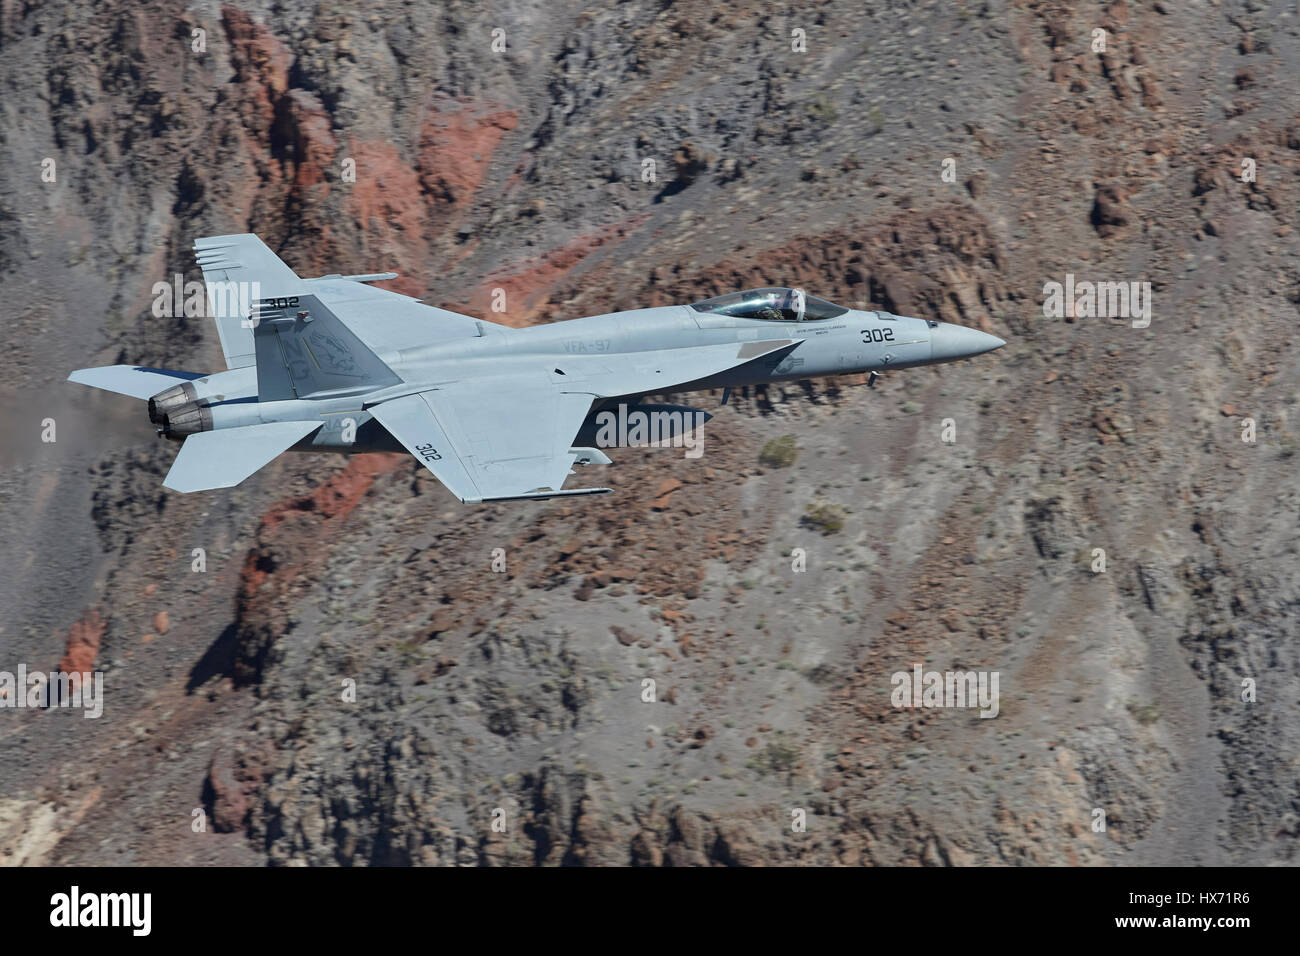 United States Navy F/A-18 Super Hornet Flying At Low Level Through A Desert Canyon. Stock Photo